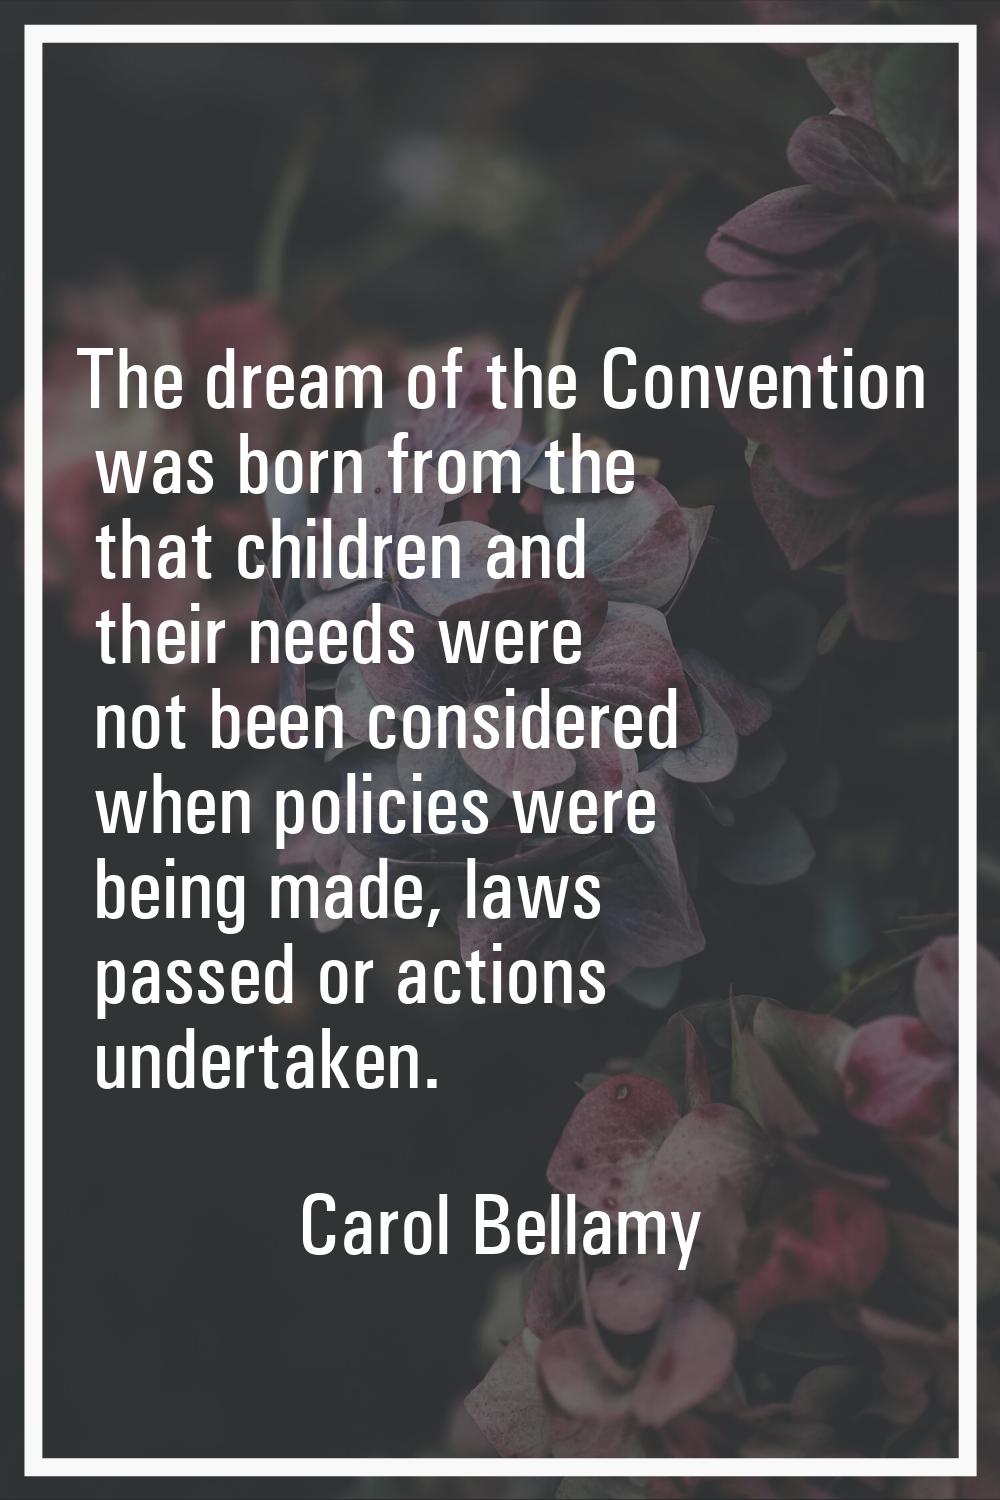 The dream of the Convention was born from the that children and their needs were not been considere